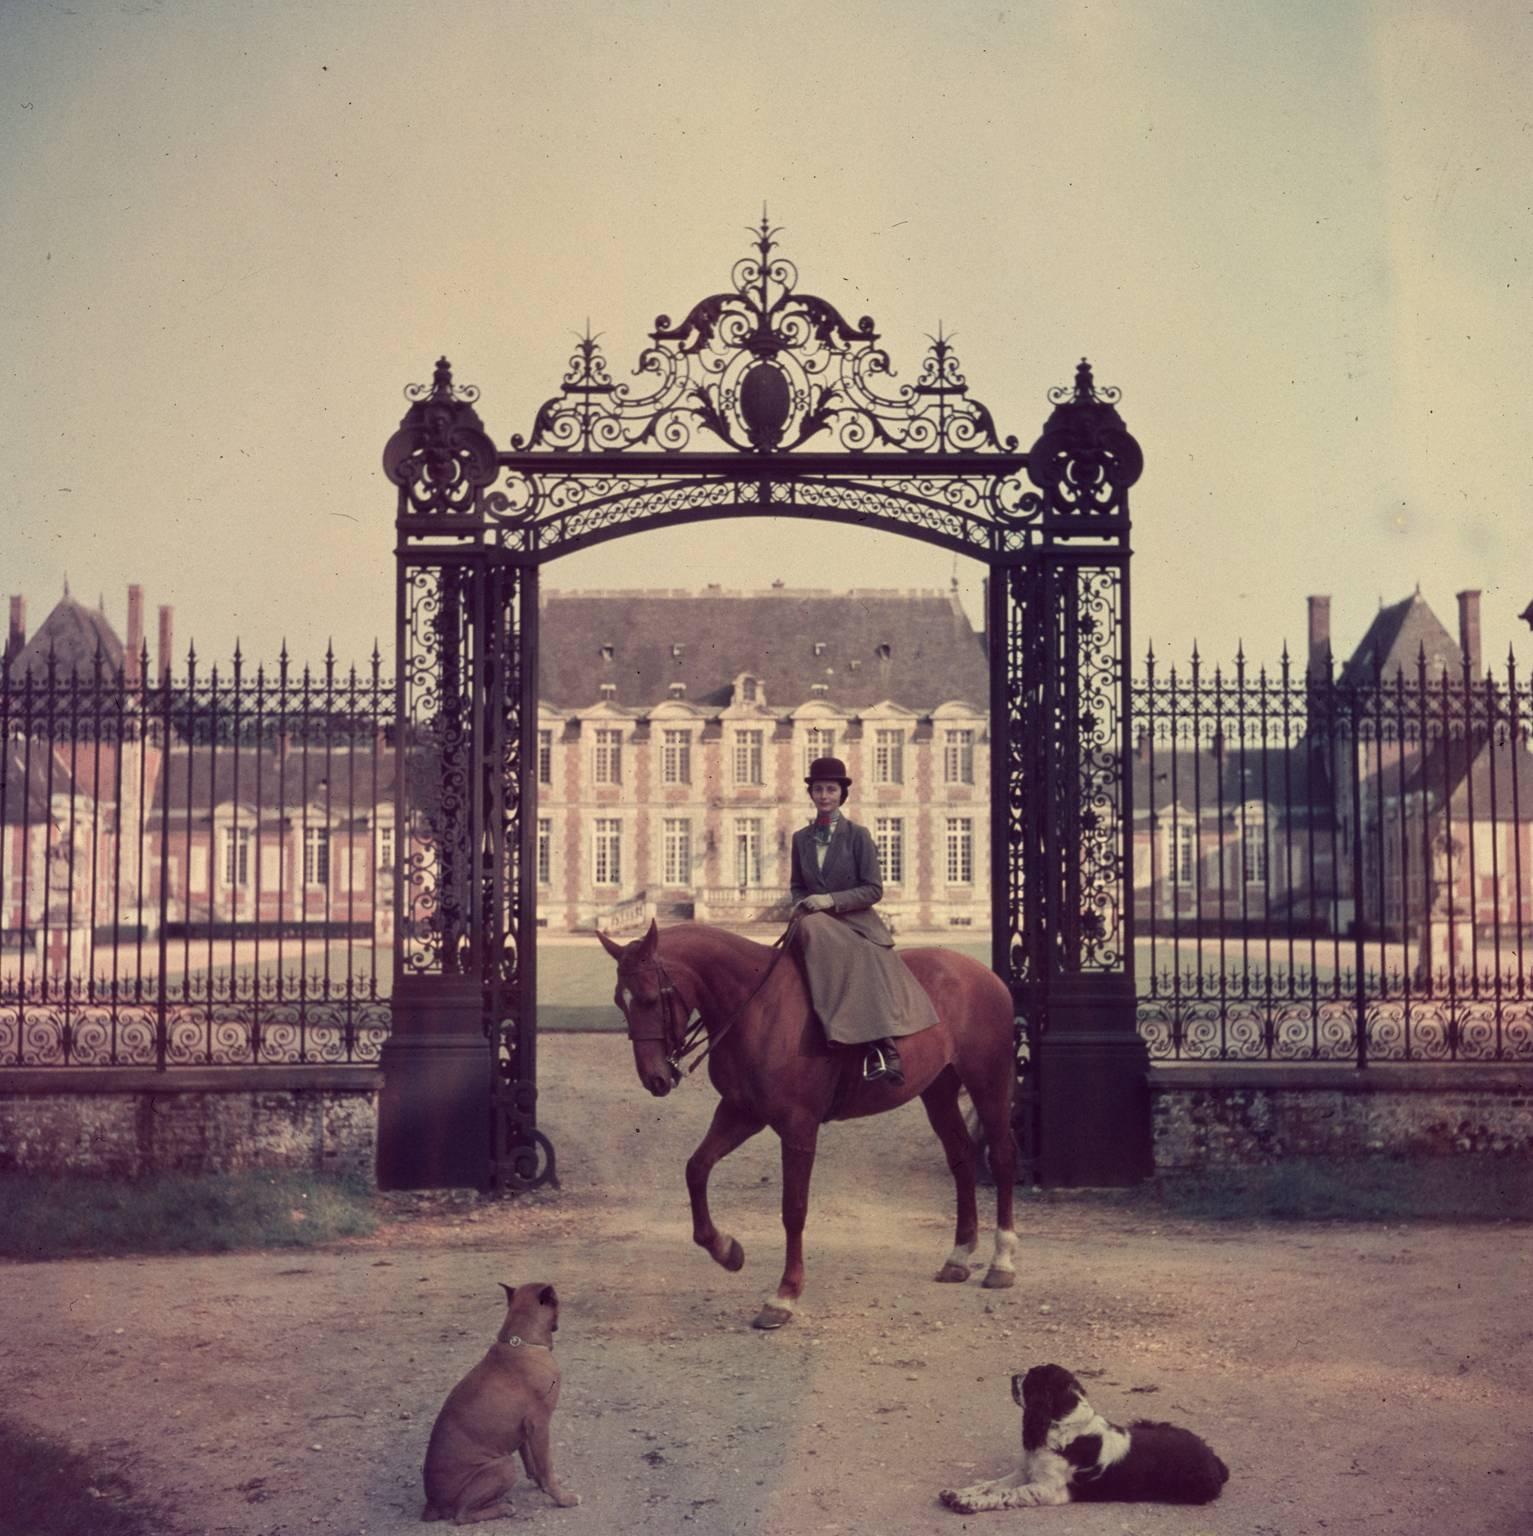 'Equestrian Entrance' by Slim Aarons

Madame de la Haye-Jousselin on her horse at the gates to her chateau in Normandy, 1957. 

The aristocrat is photographed wearing riding hat and elegant full length coat, upon her horse in front of the opulent